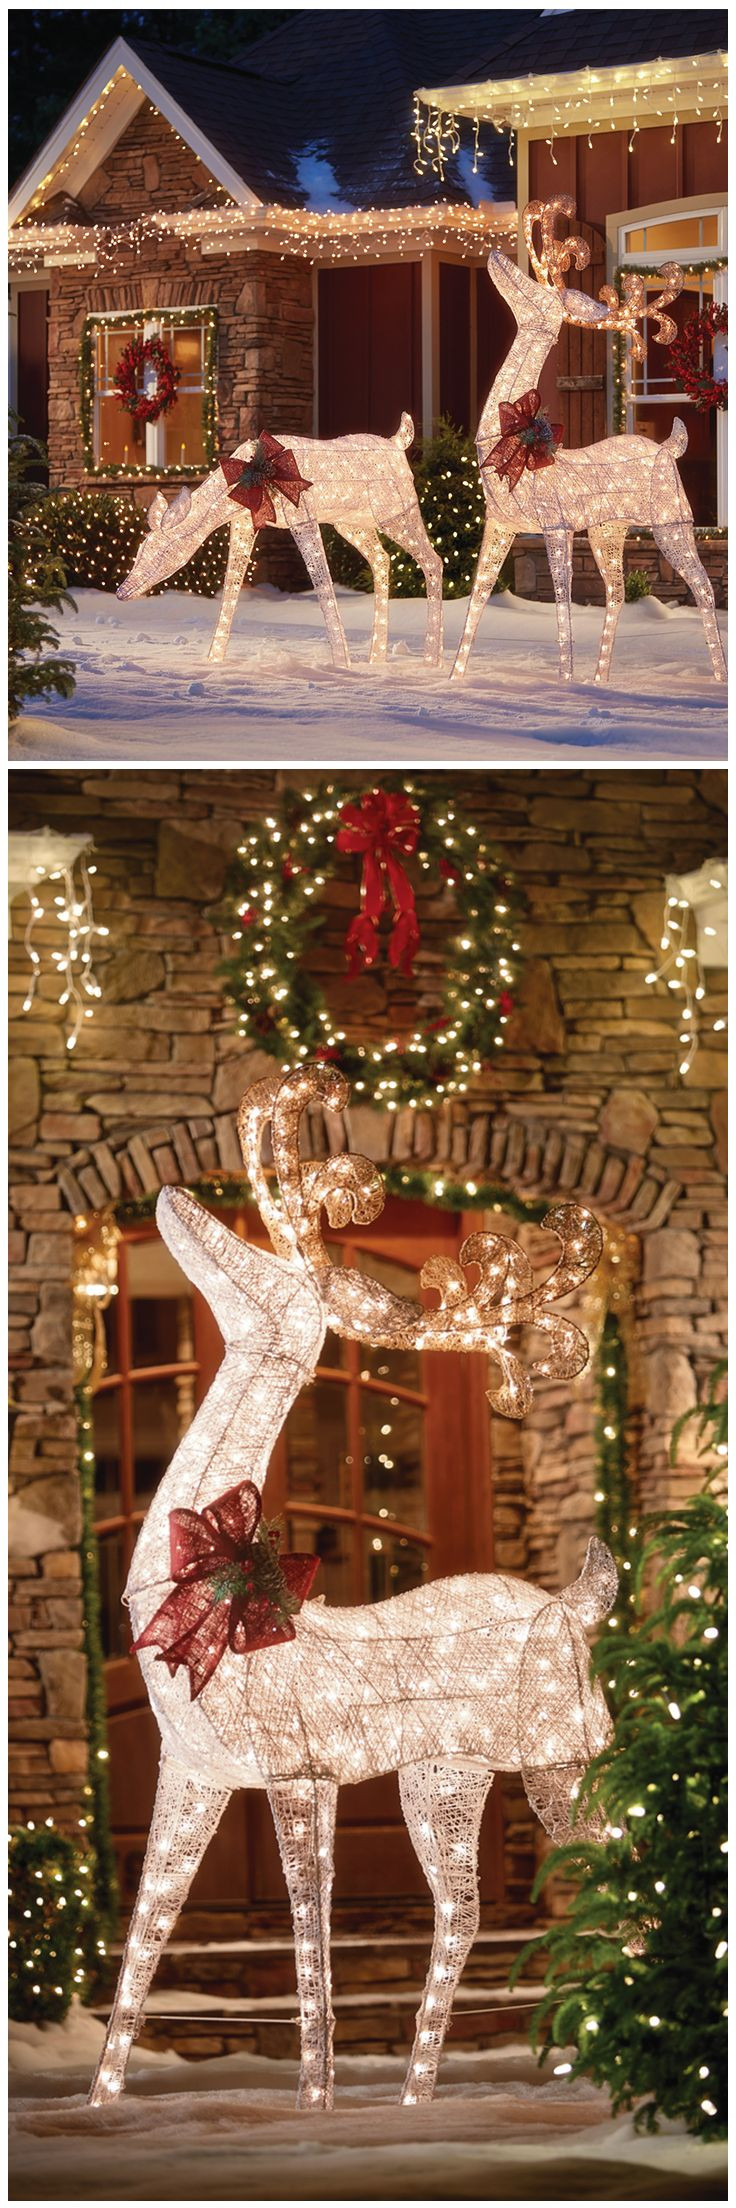 Christmas Decorations Outdoor
 These luminous deer figures will add a classic rustic